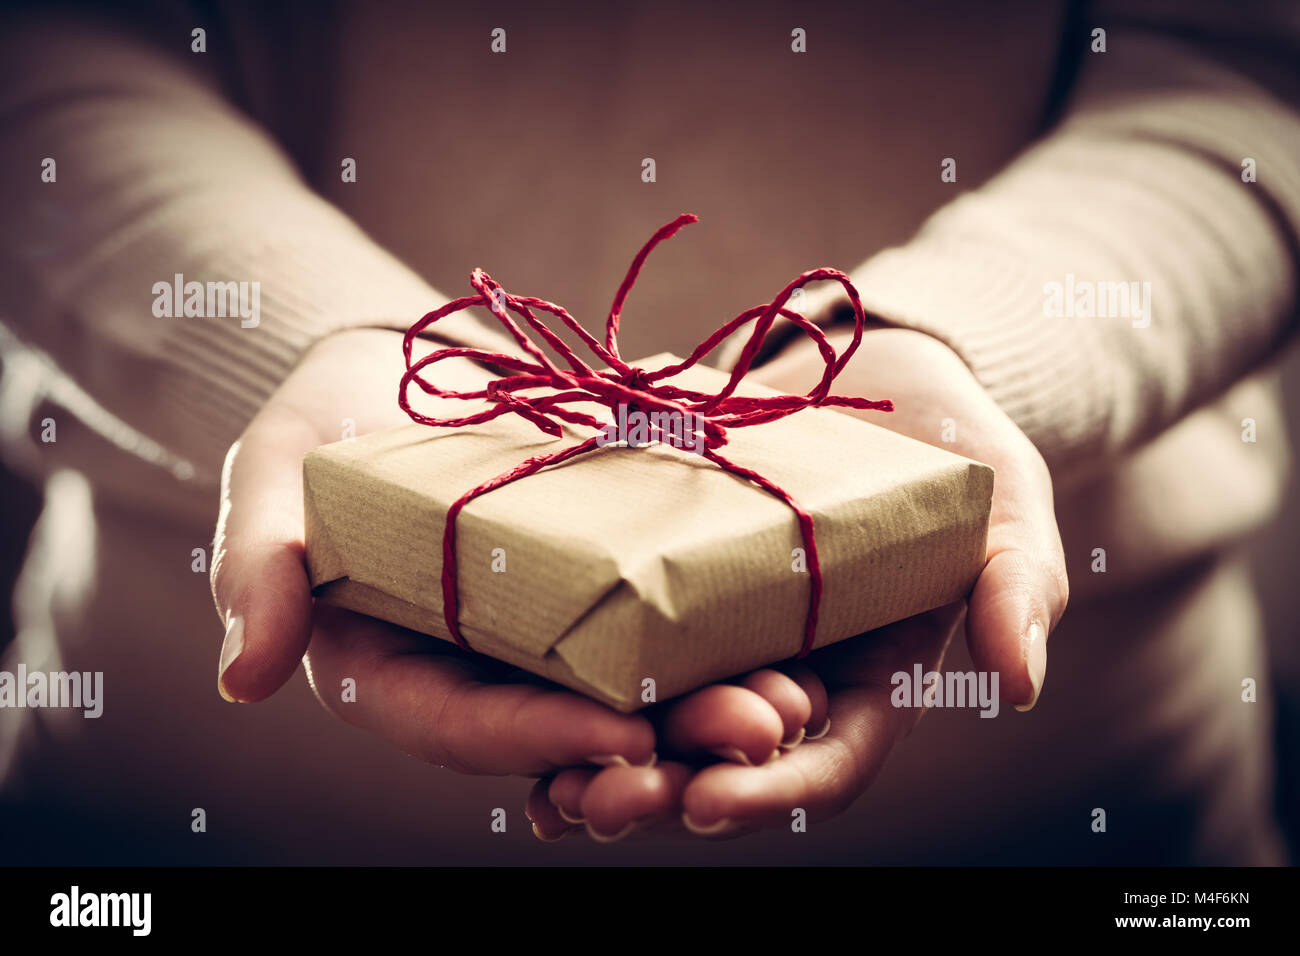 Giving a gift, handmade present wrapped in paper Stock Photo